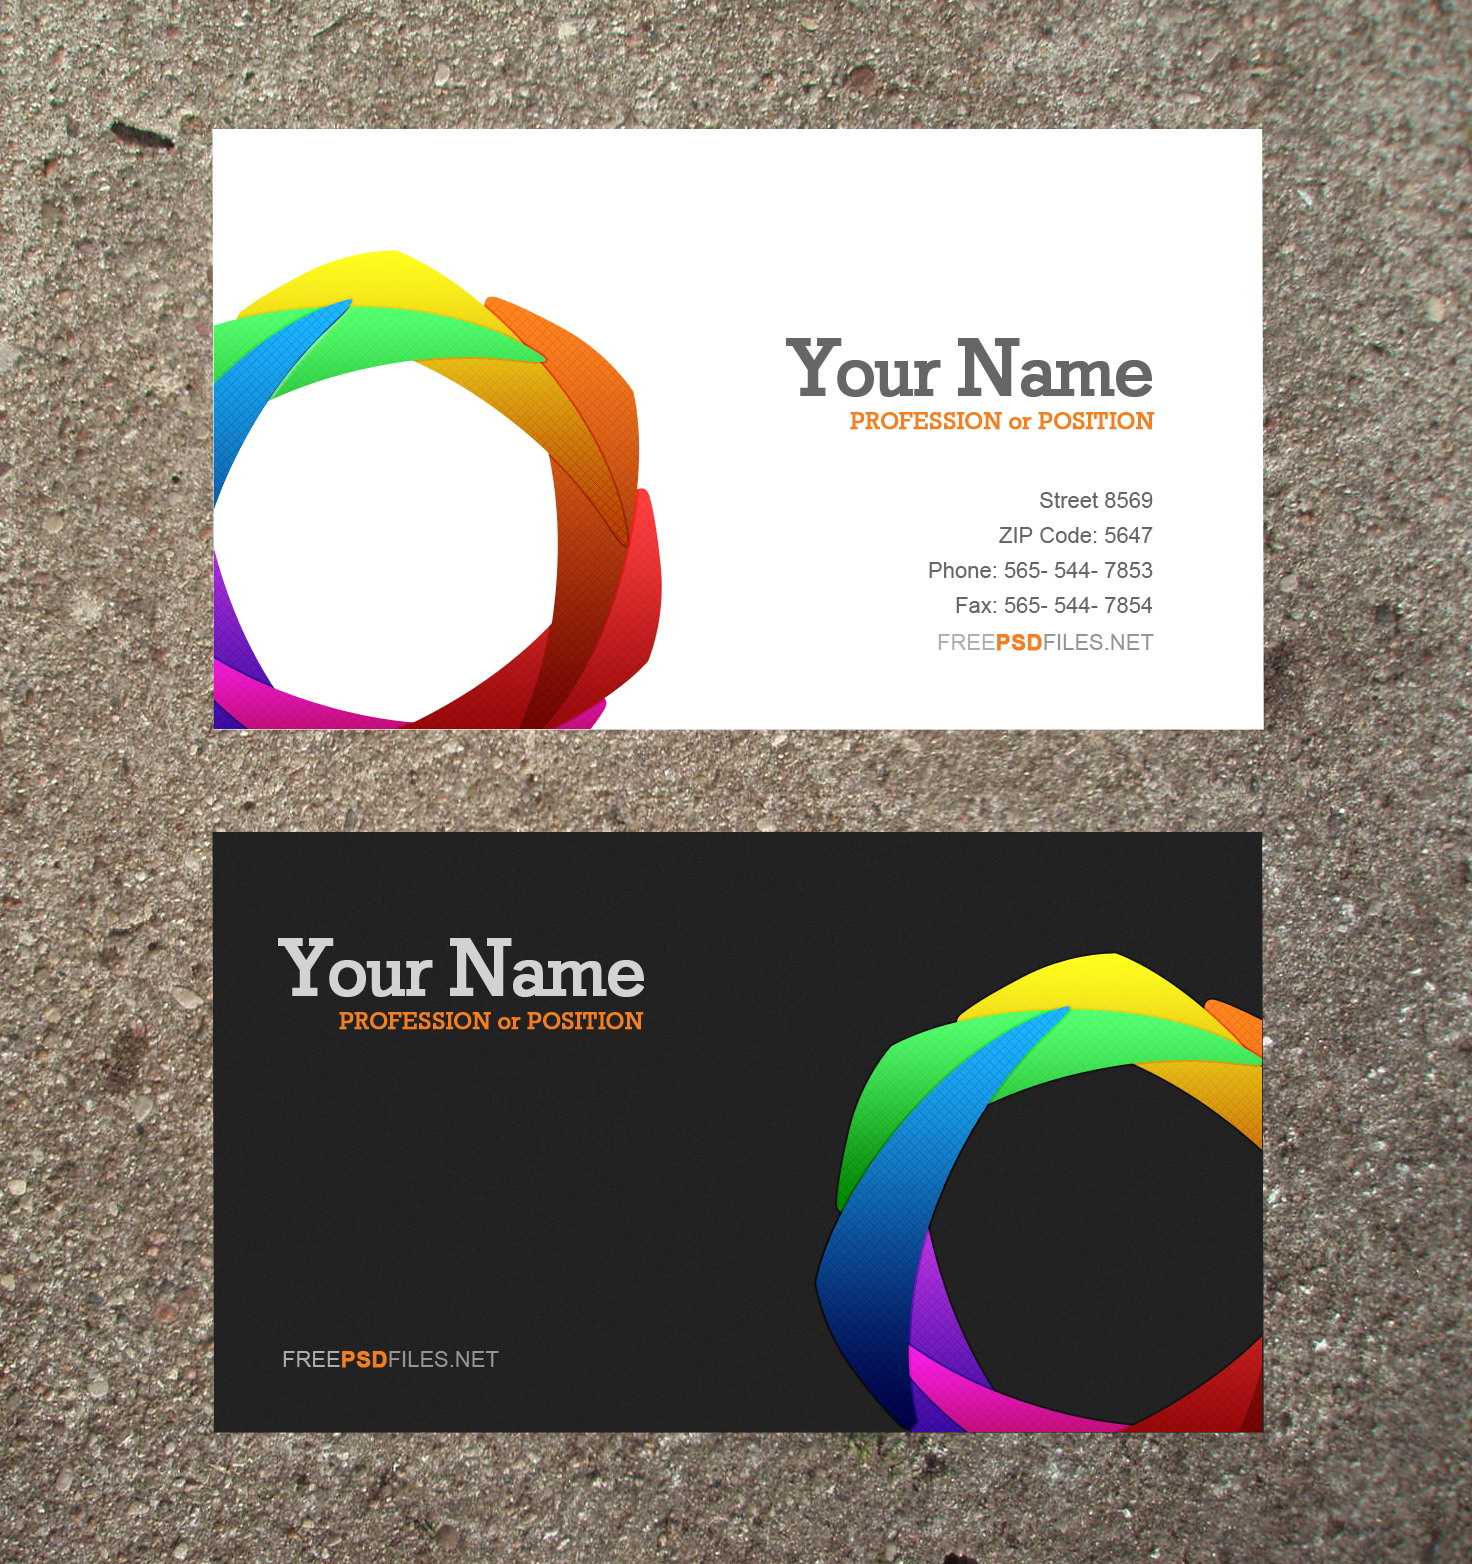 17 Business Cards Templates Free Downloads Images – Free Pertaining To Blank Business Card Template Download